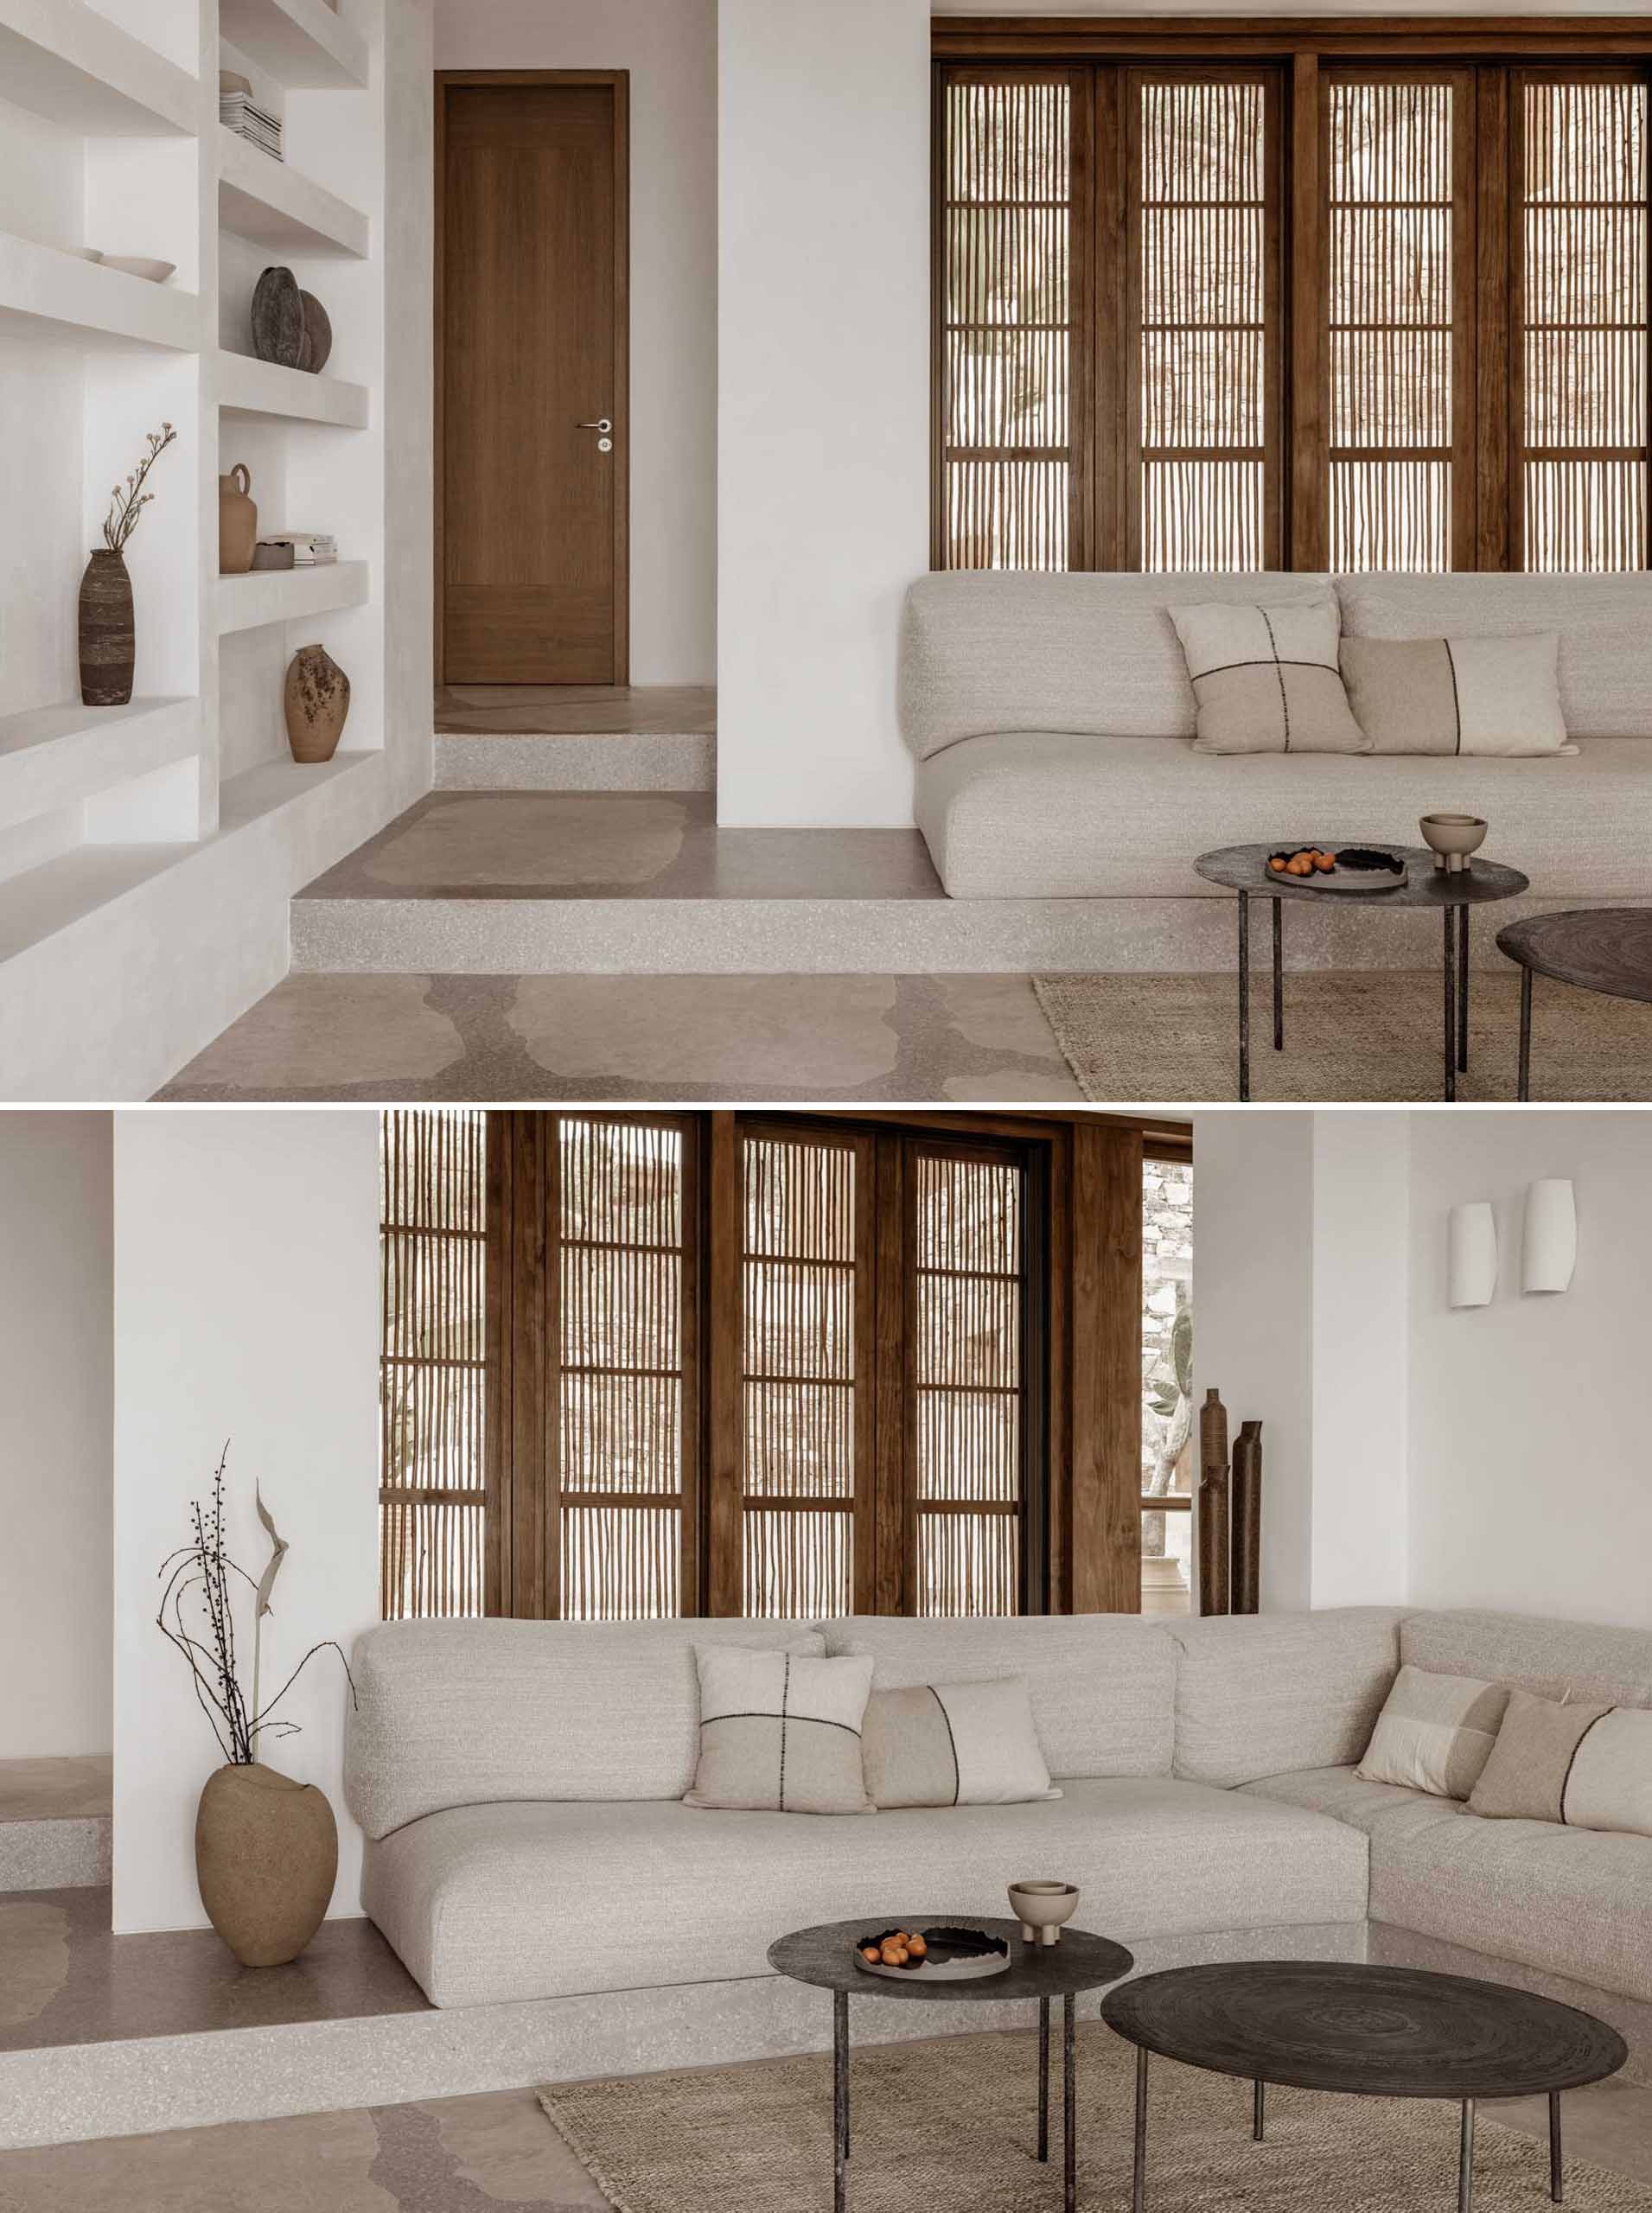 A modern living room with a neutral color and material palette, and built-in shelving and doors that open to a terrace.